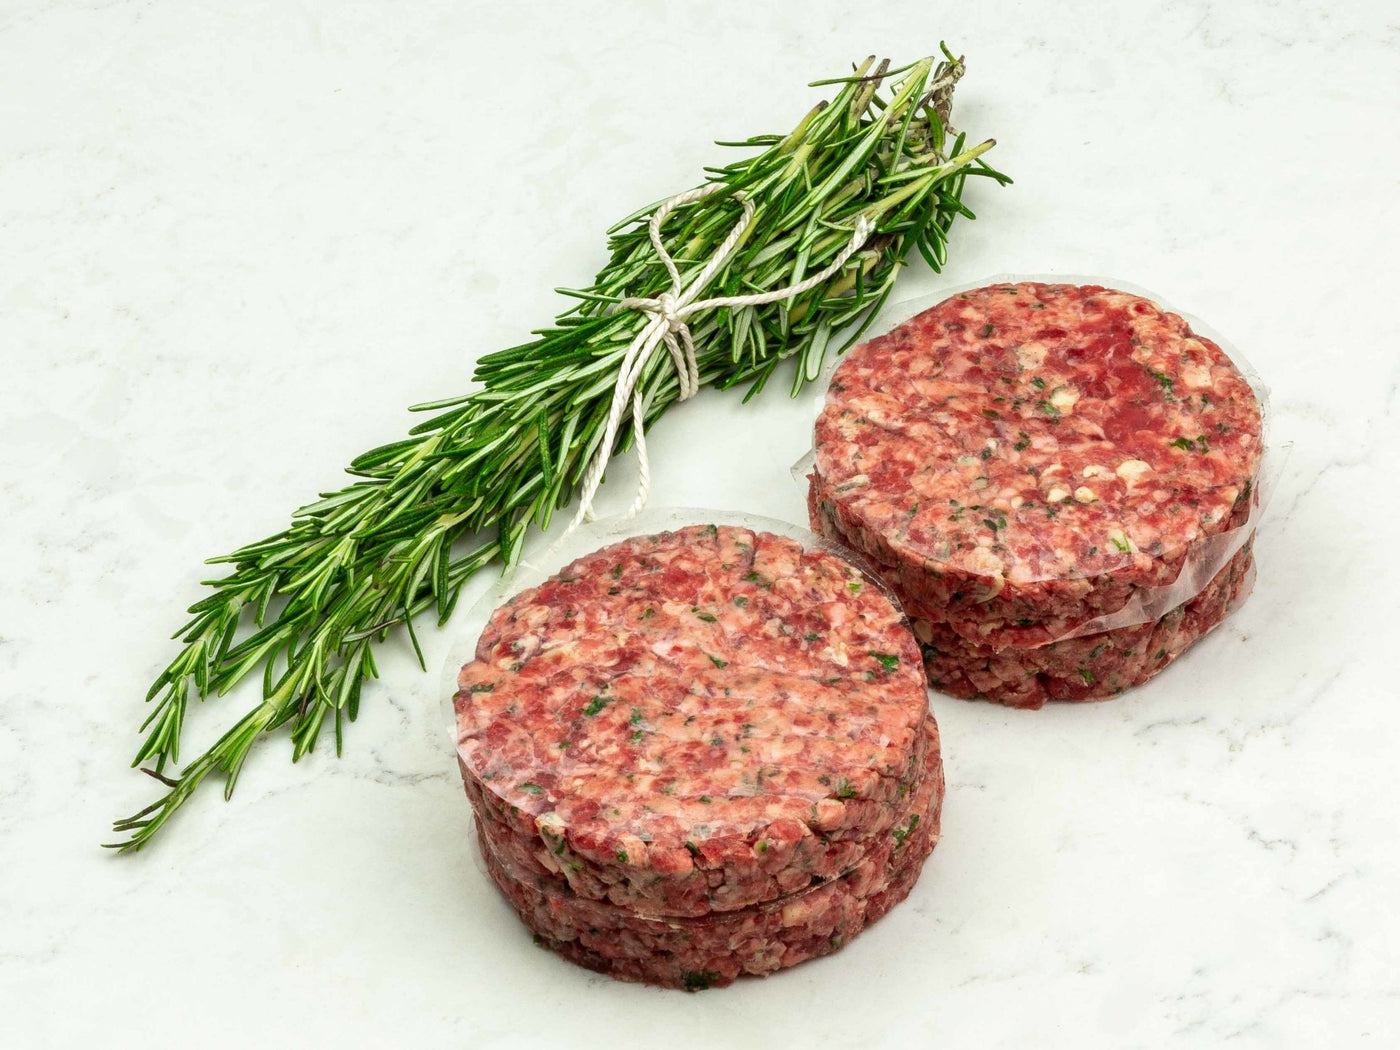 Dry-Aged Beef, Bone Marrow and Truffle Burgers 4 x 150g - Beef - Thomas Joseph Butchery - Ethical Dry-Aged Meat The Best Steak UK Thomas Joseph Butchery